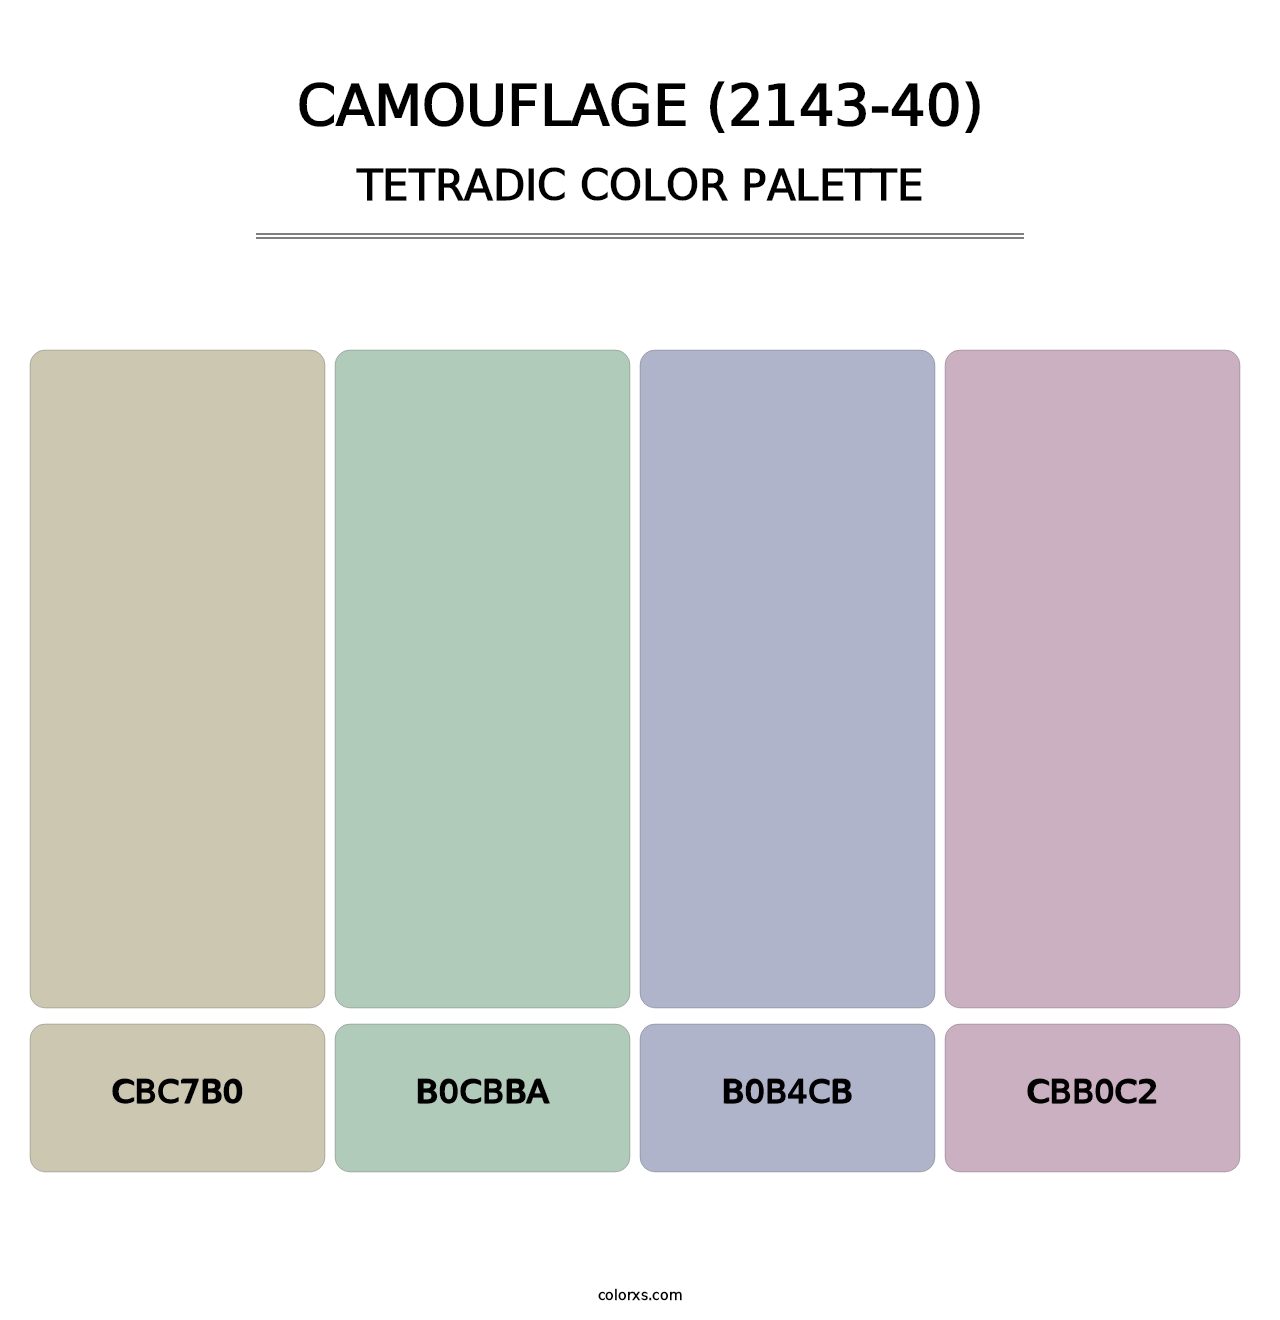 Camouflage (2143-40) - Tetradic Color Palette